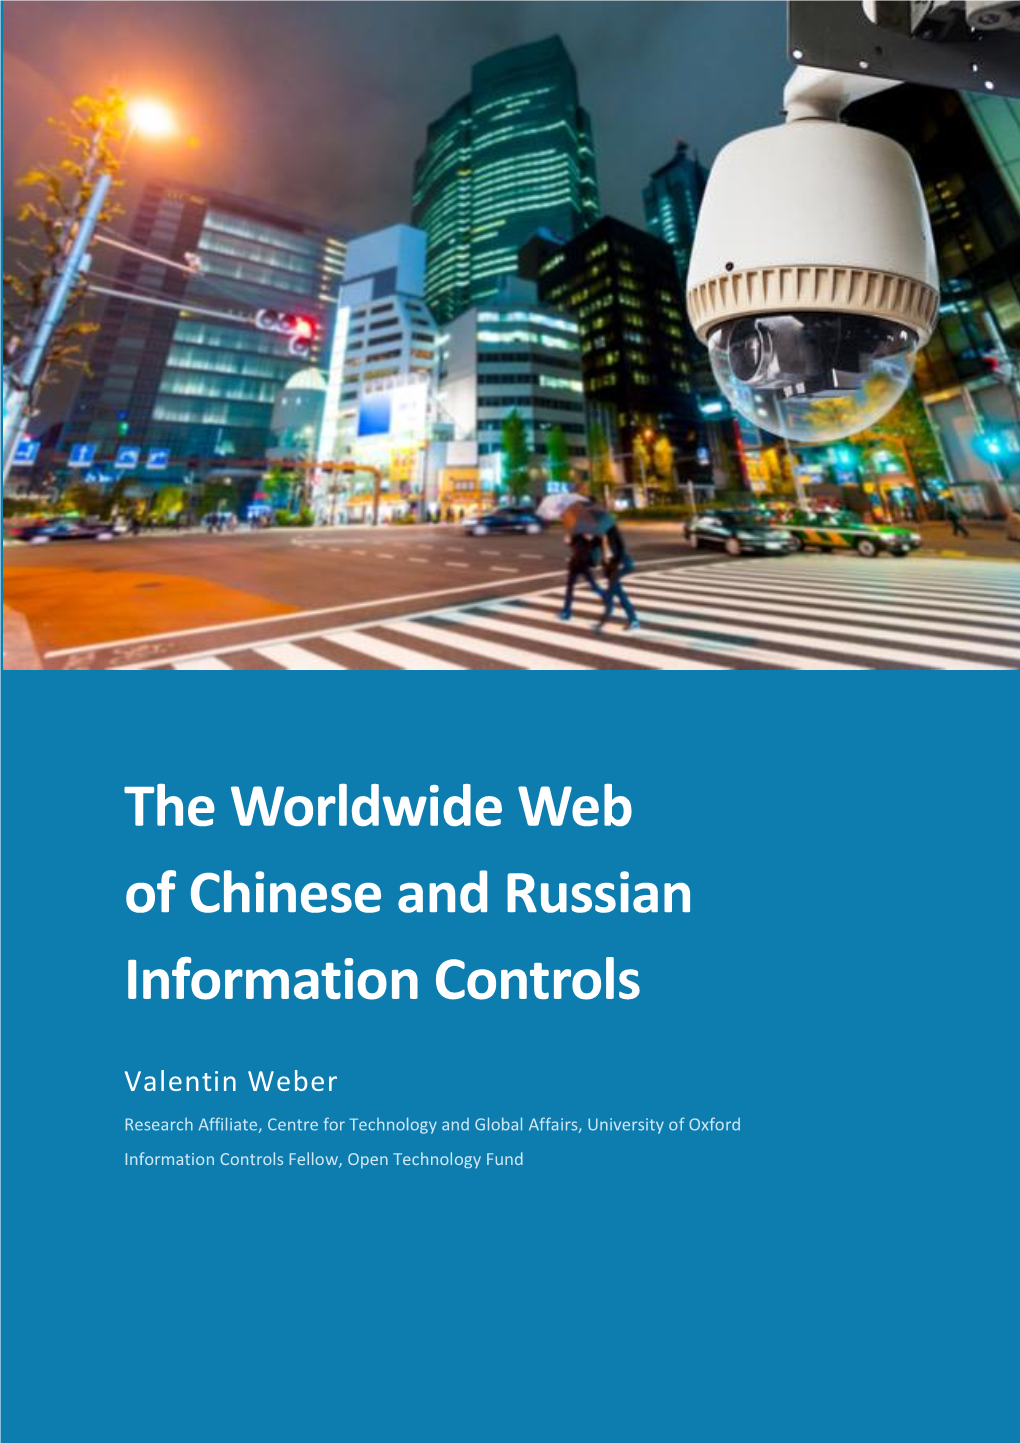 The Worldwide Web of Chinese and Russian Information Controls